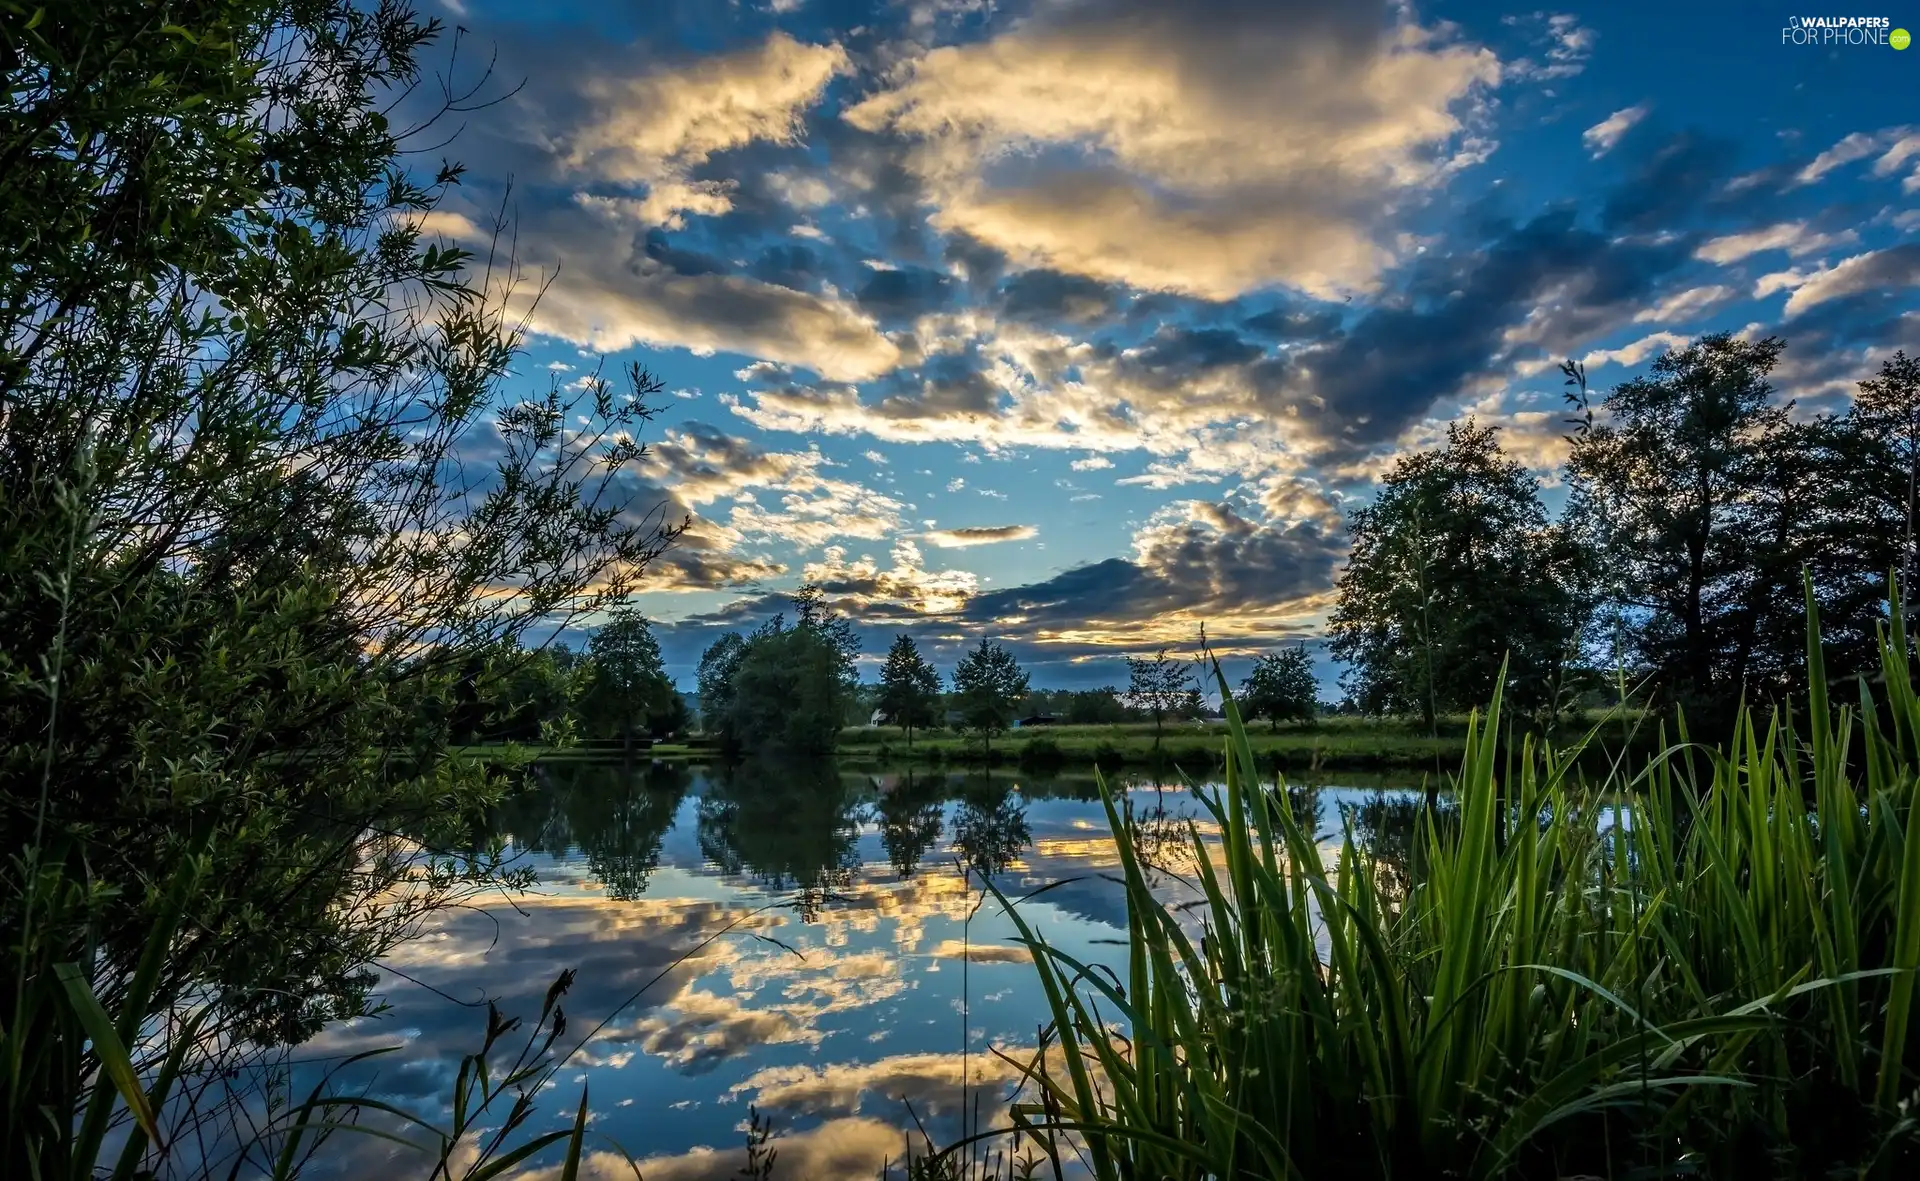 viewes, lake, clouds, reflection, grass, trees